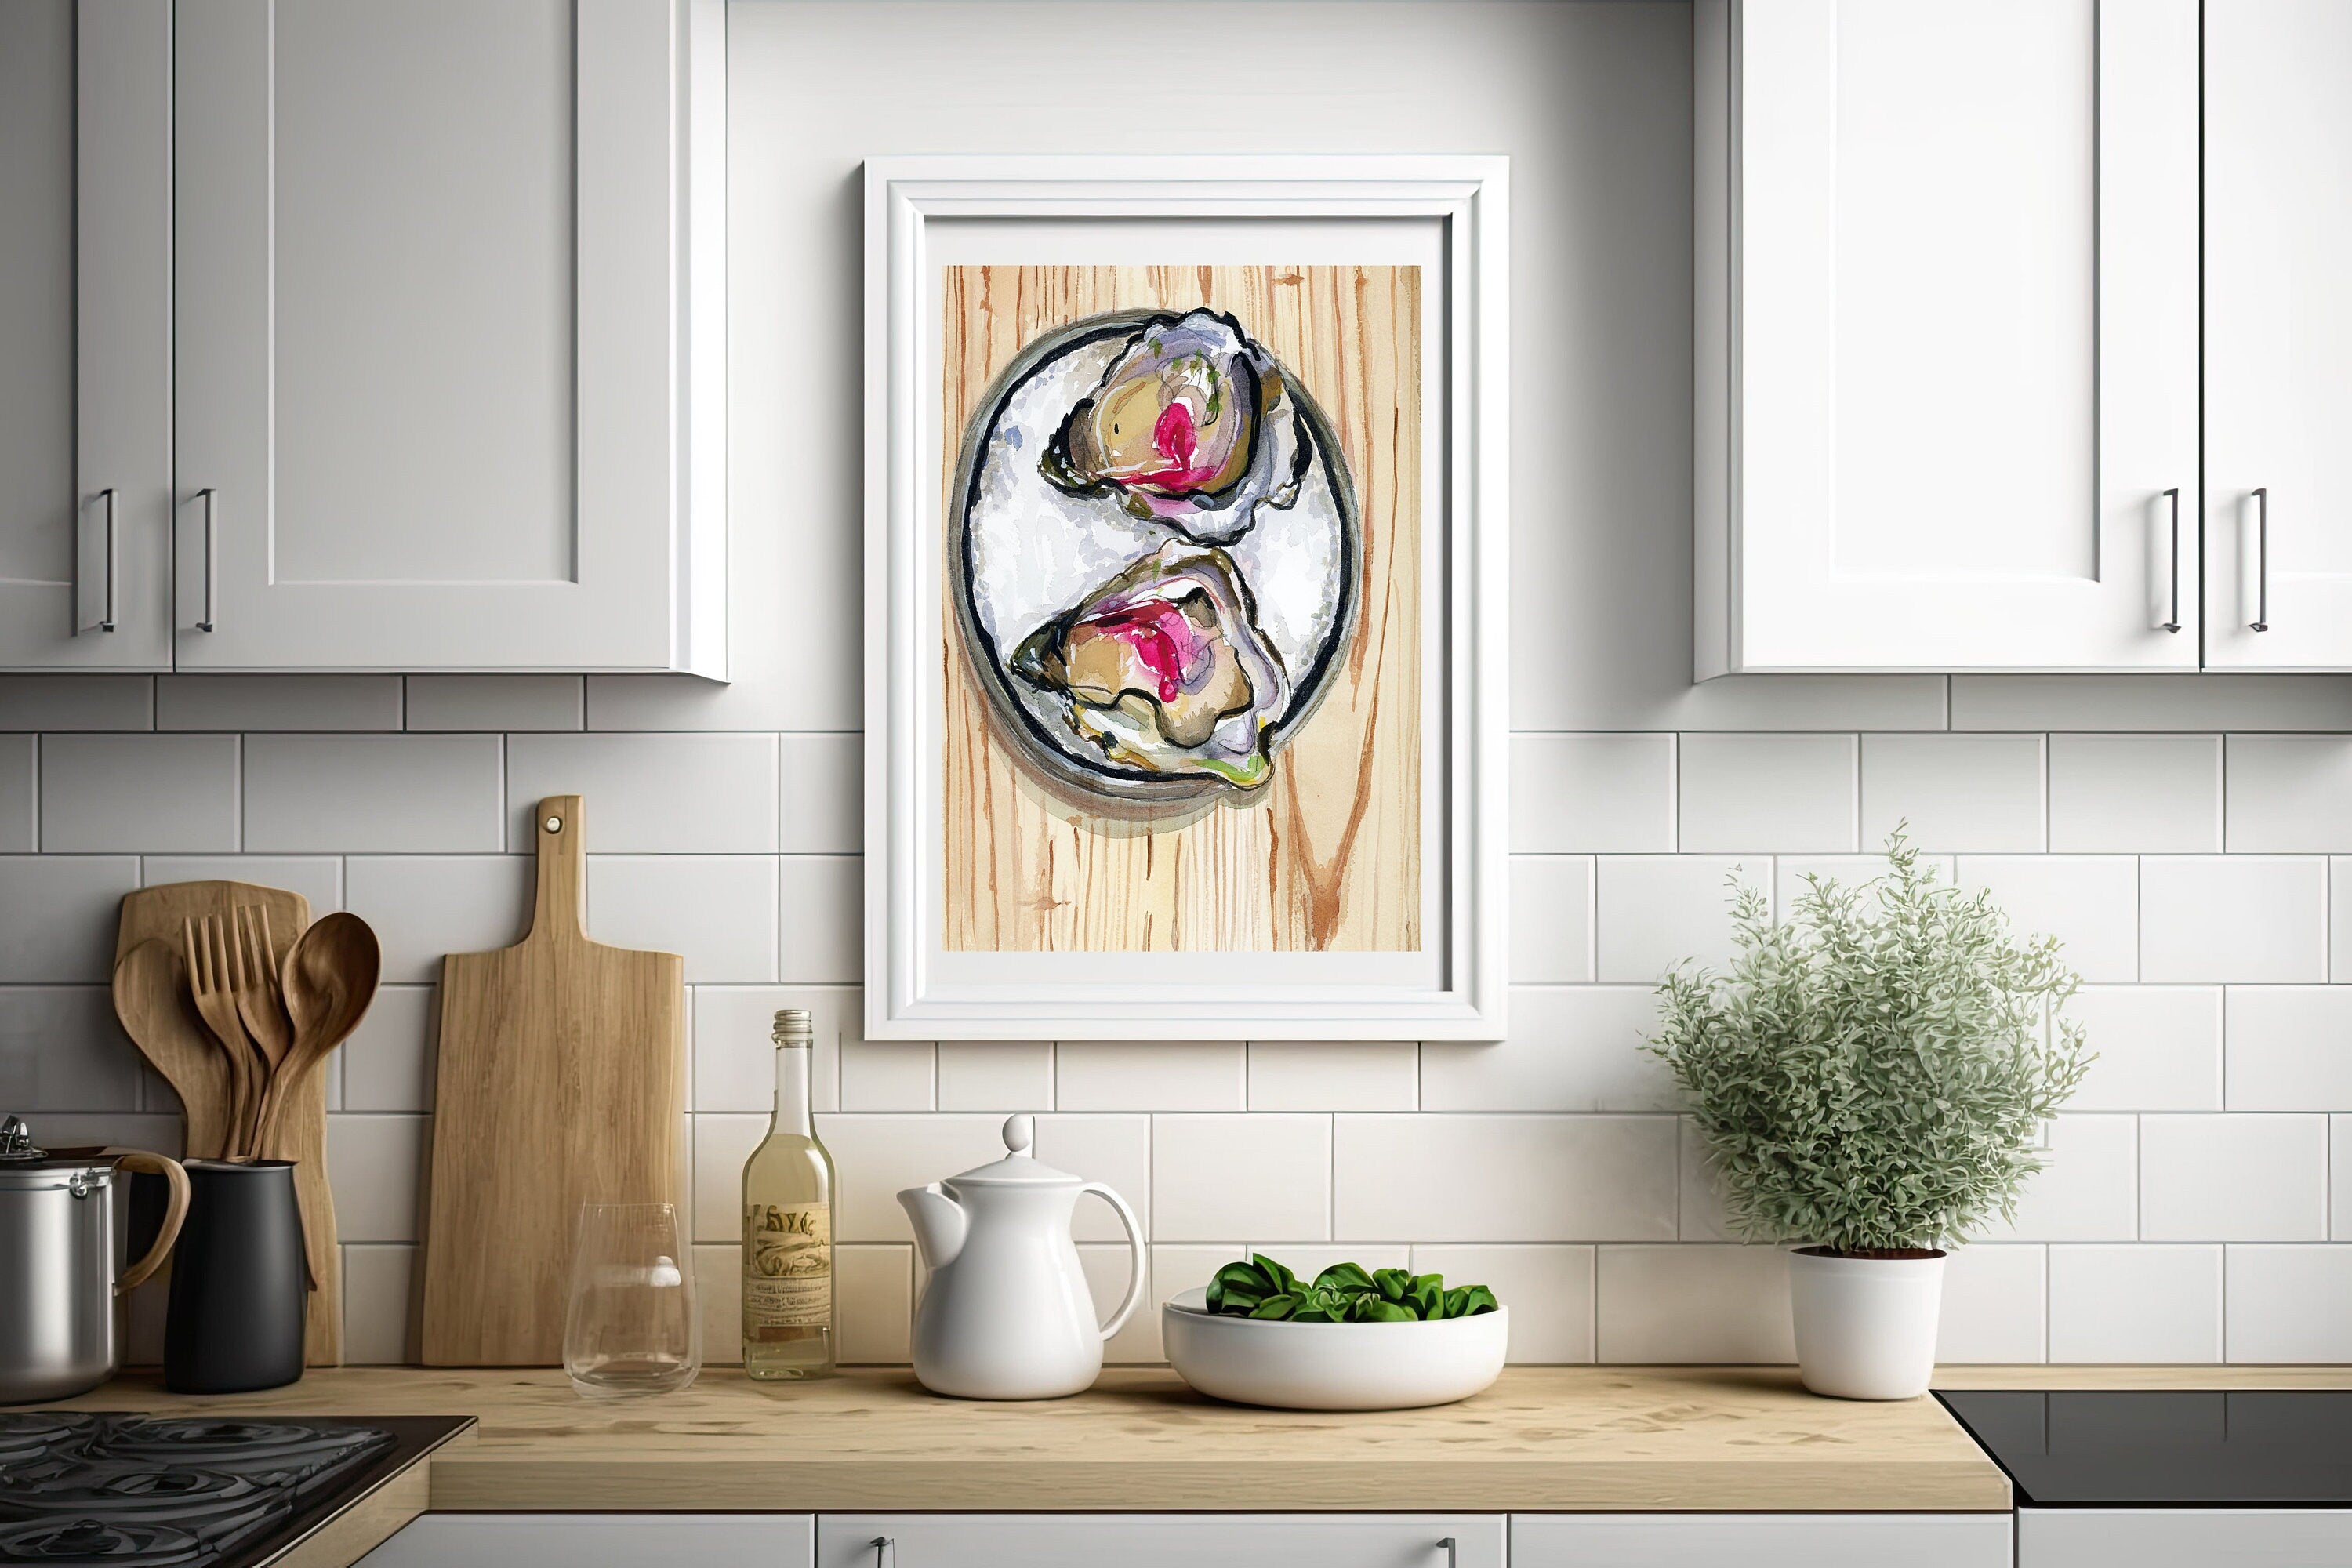 Pink oyster shell print of painting by Medjool Studio. Print of original gouache painting that captures the delicate intricacies of an oyster shell in a mesmerizing watercolor style